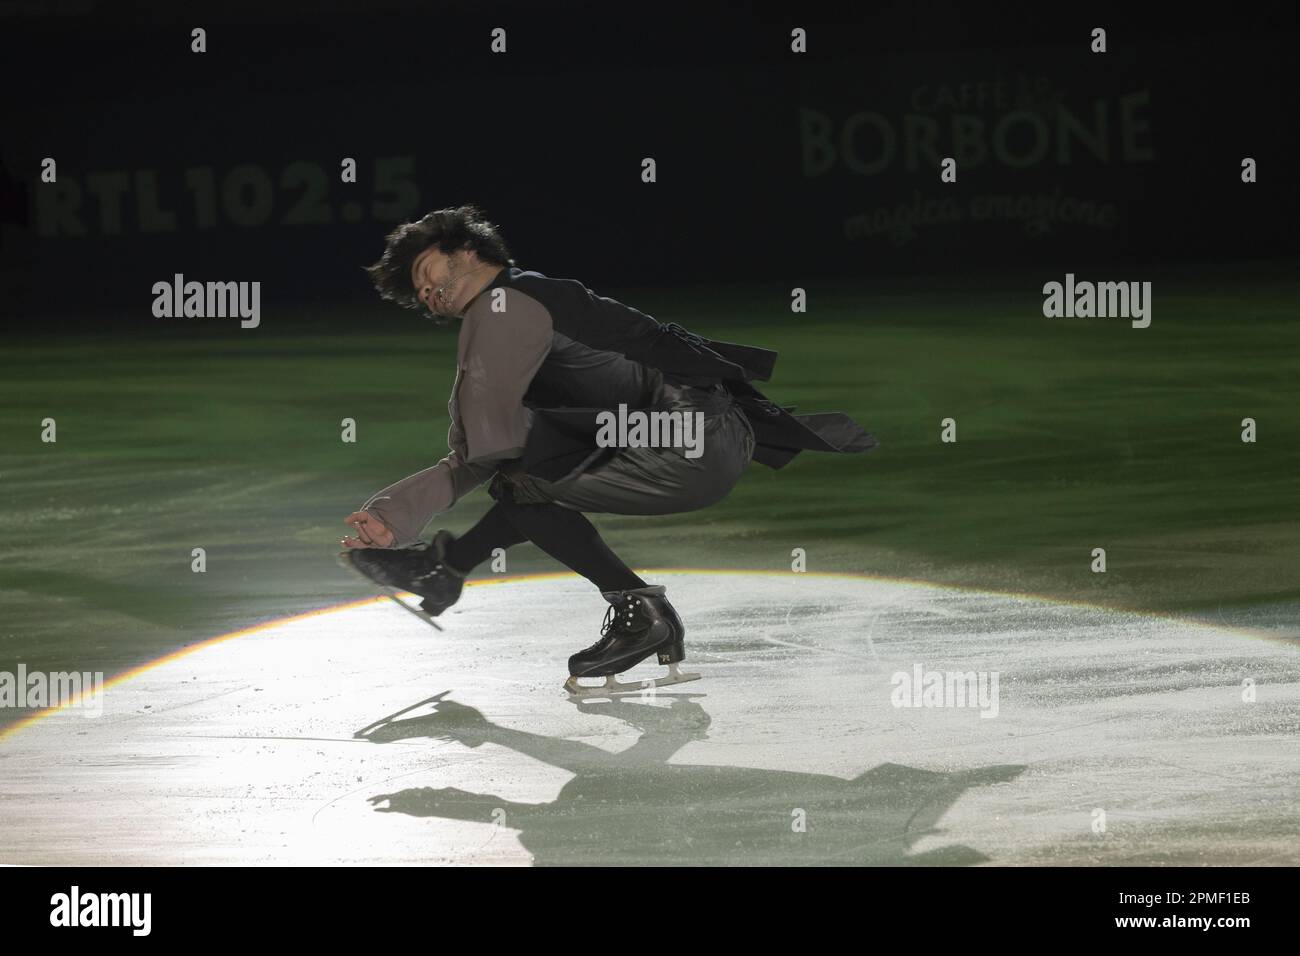 Raffaele Francesco Zich skating on the music note of the movie Mission at the Cinema on ice show Stock Photo